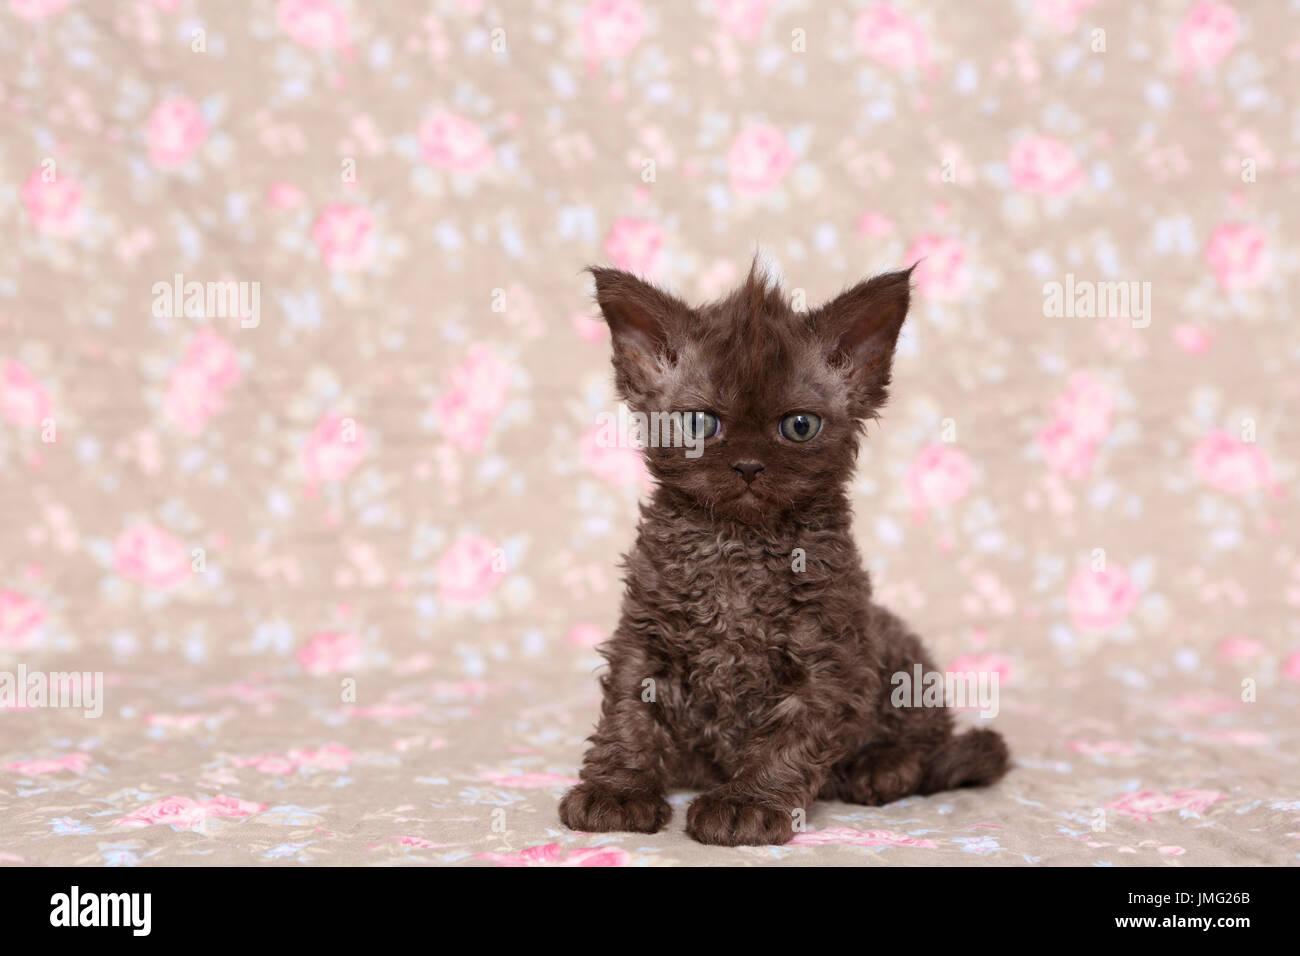 Selkirk Rex. Kitten (6 weeks old) sitting. Studio picture seen against a floral design wallpaper. Germany Stock Photo